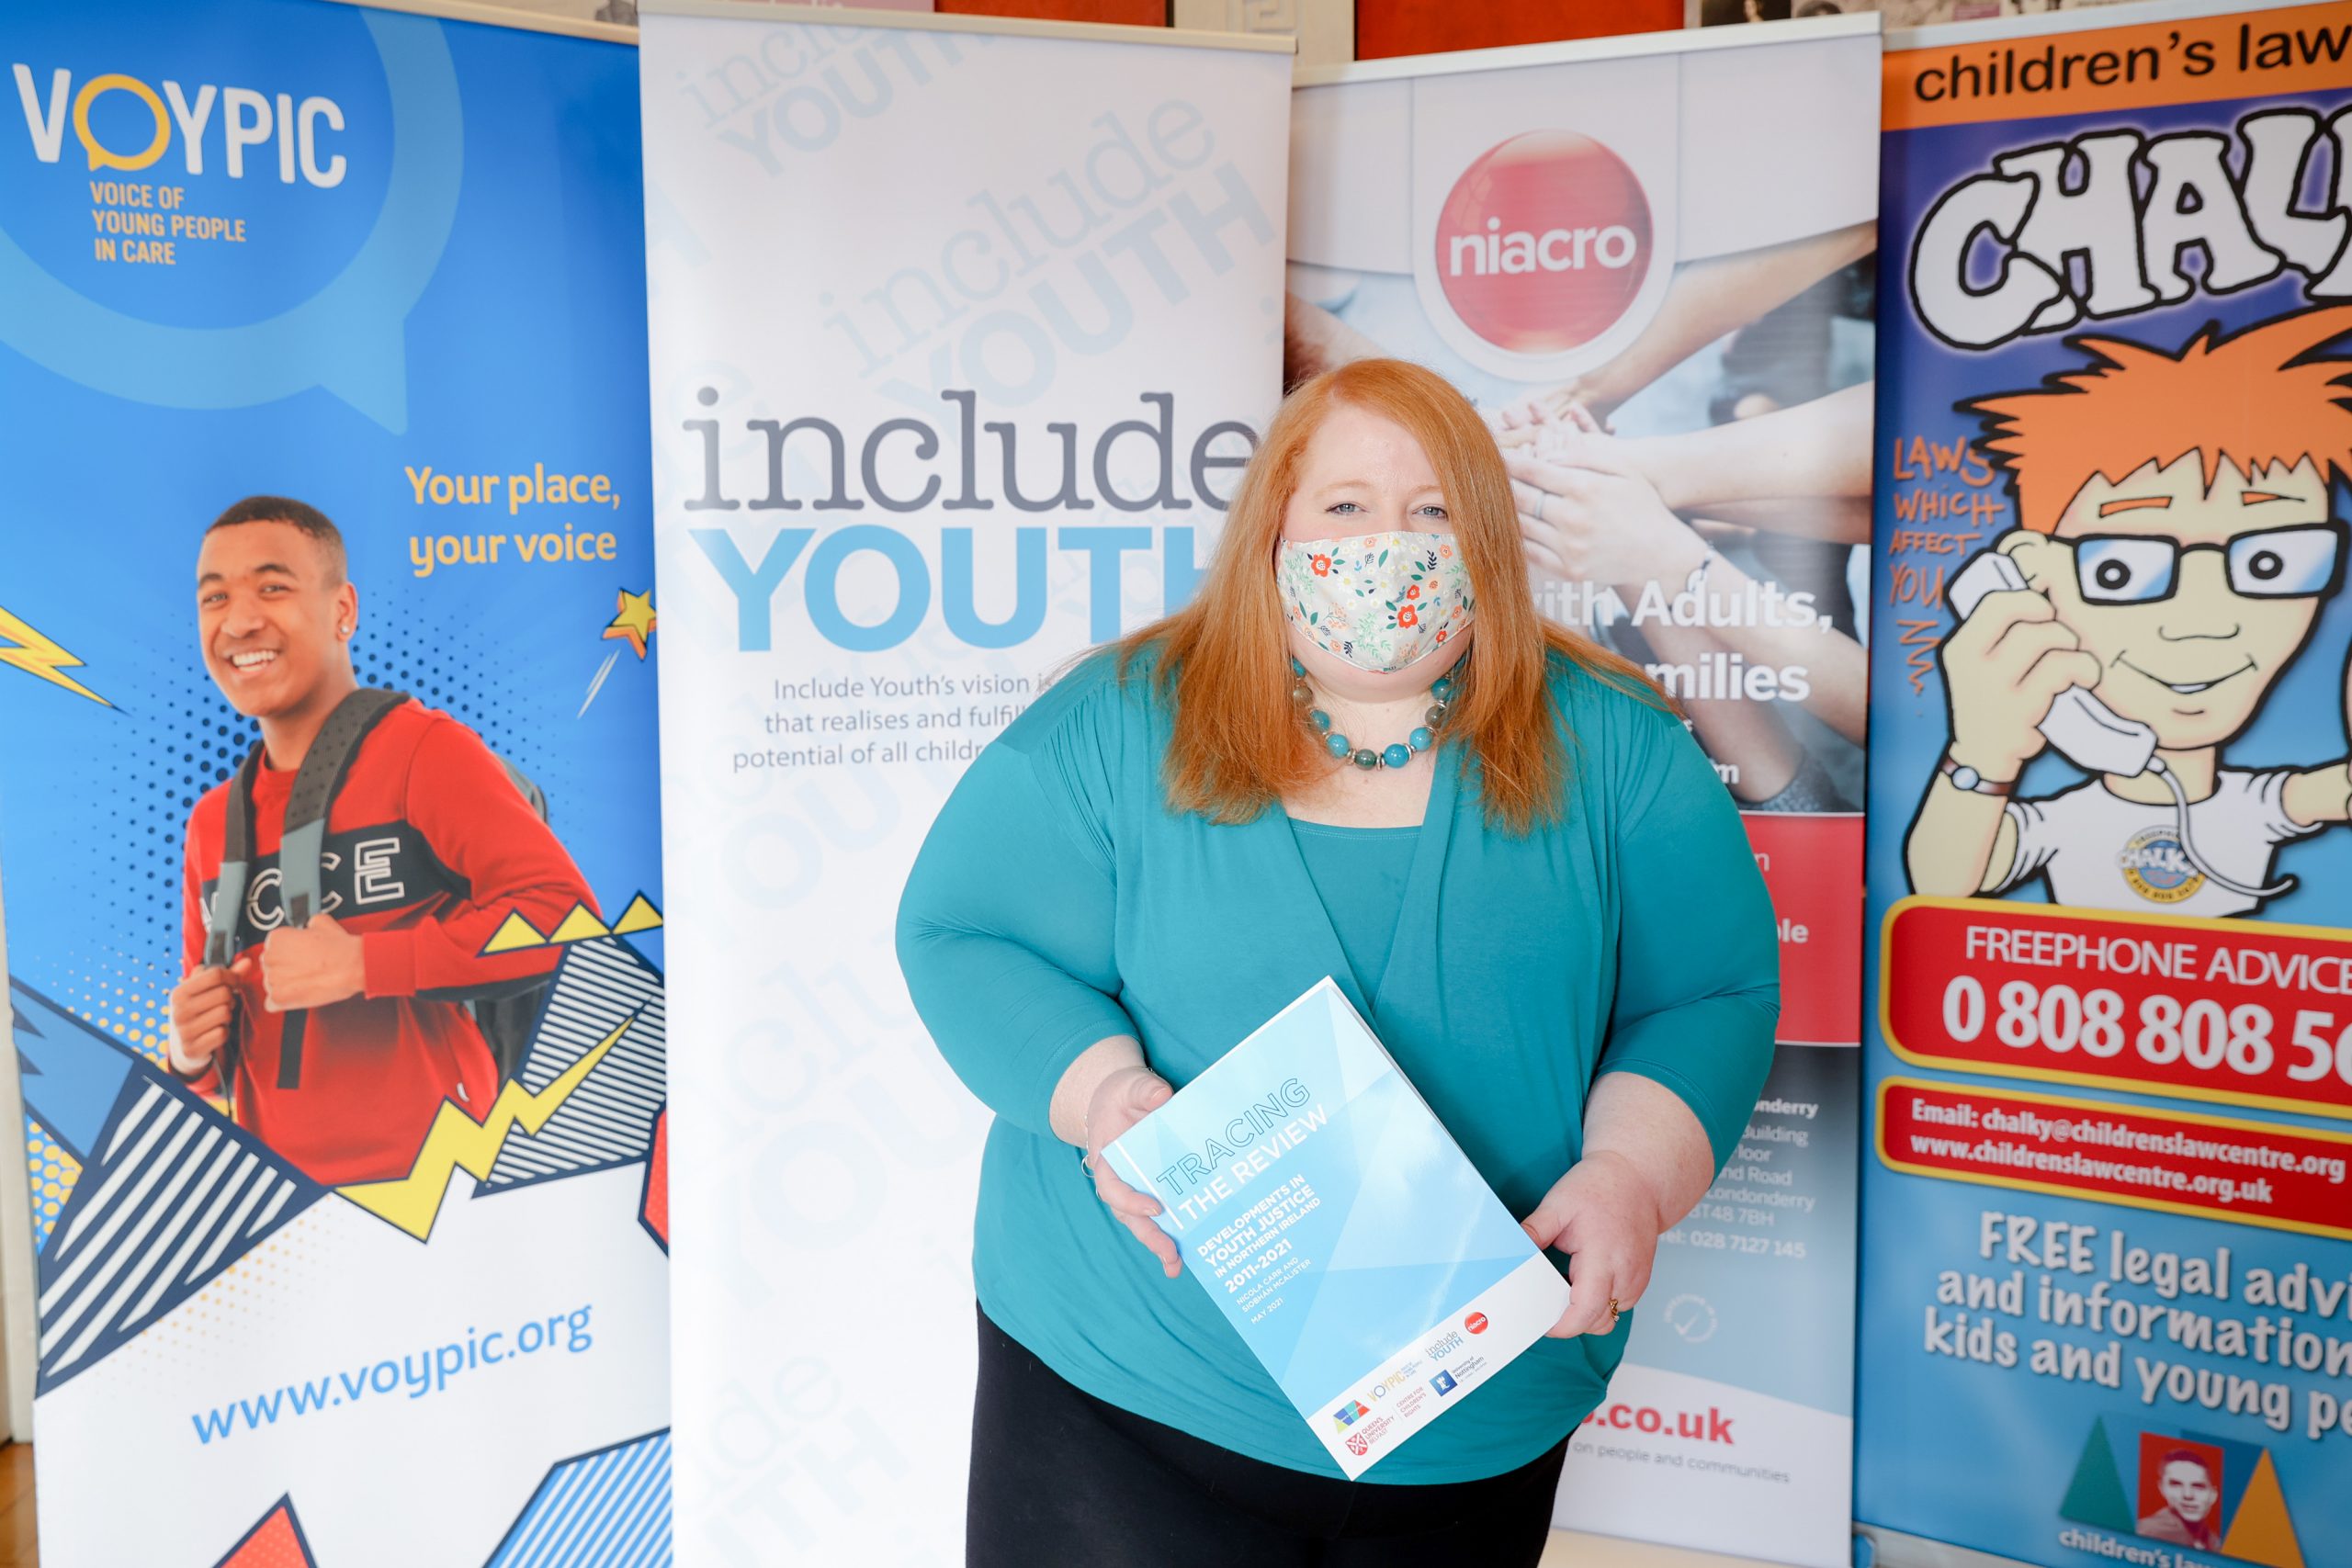 Justice Minister, Naomi Long MLA, at the launch of 'Tracing the Review' at Stormont on Tuesday 23 November